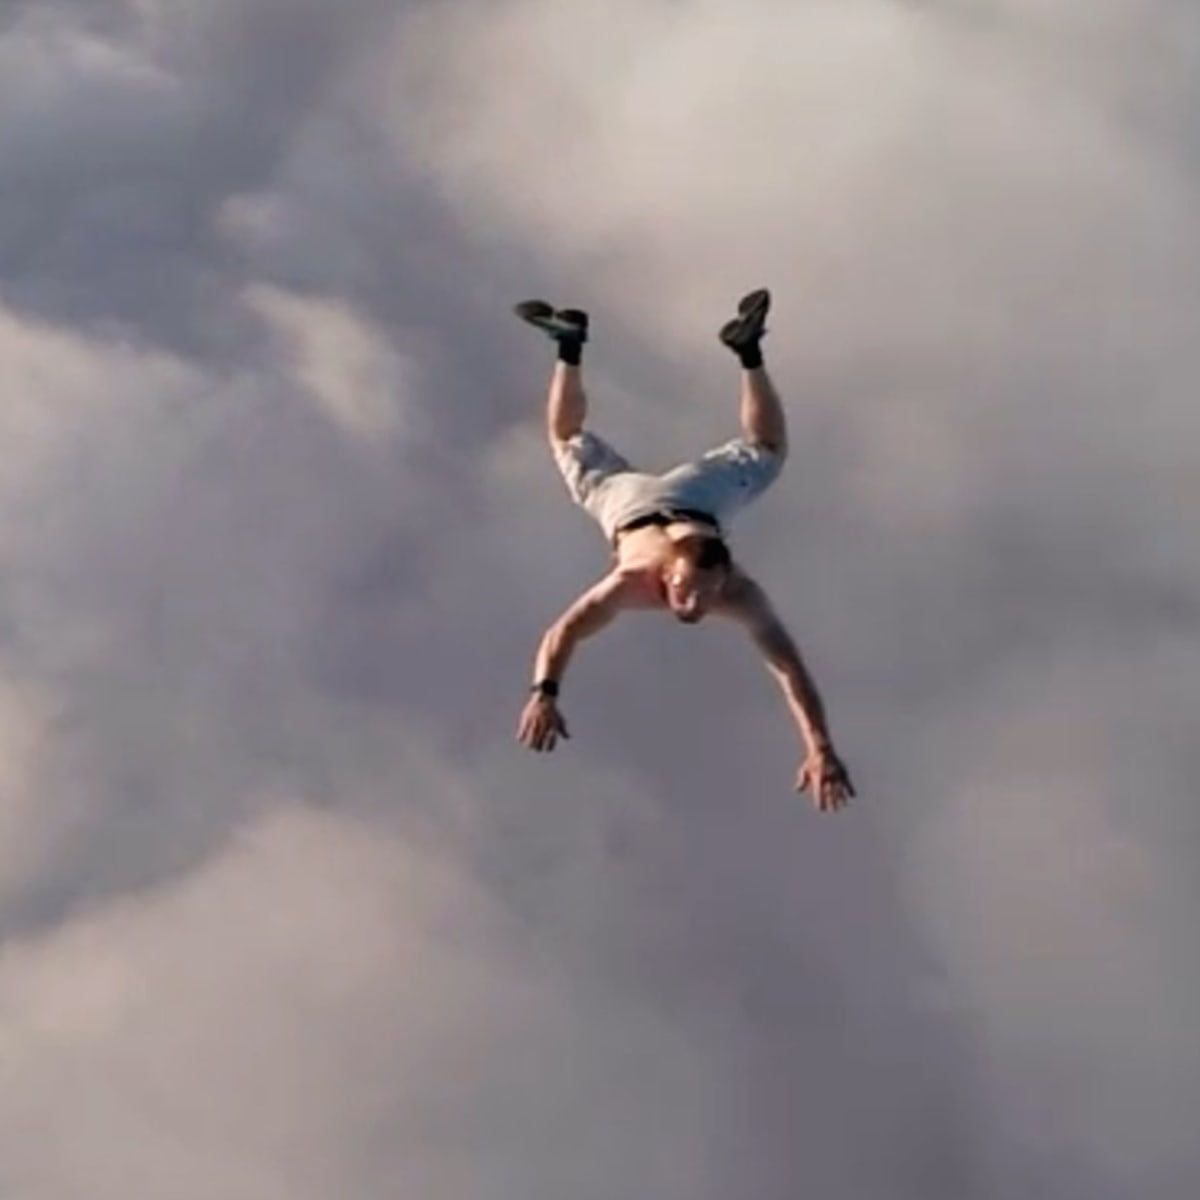 Man survives jumping without a parachute from dizzying height of